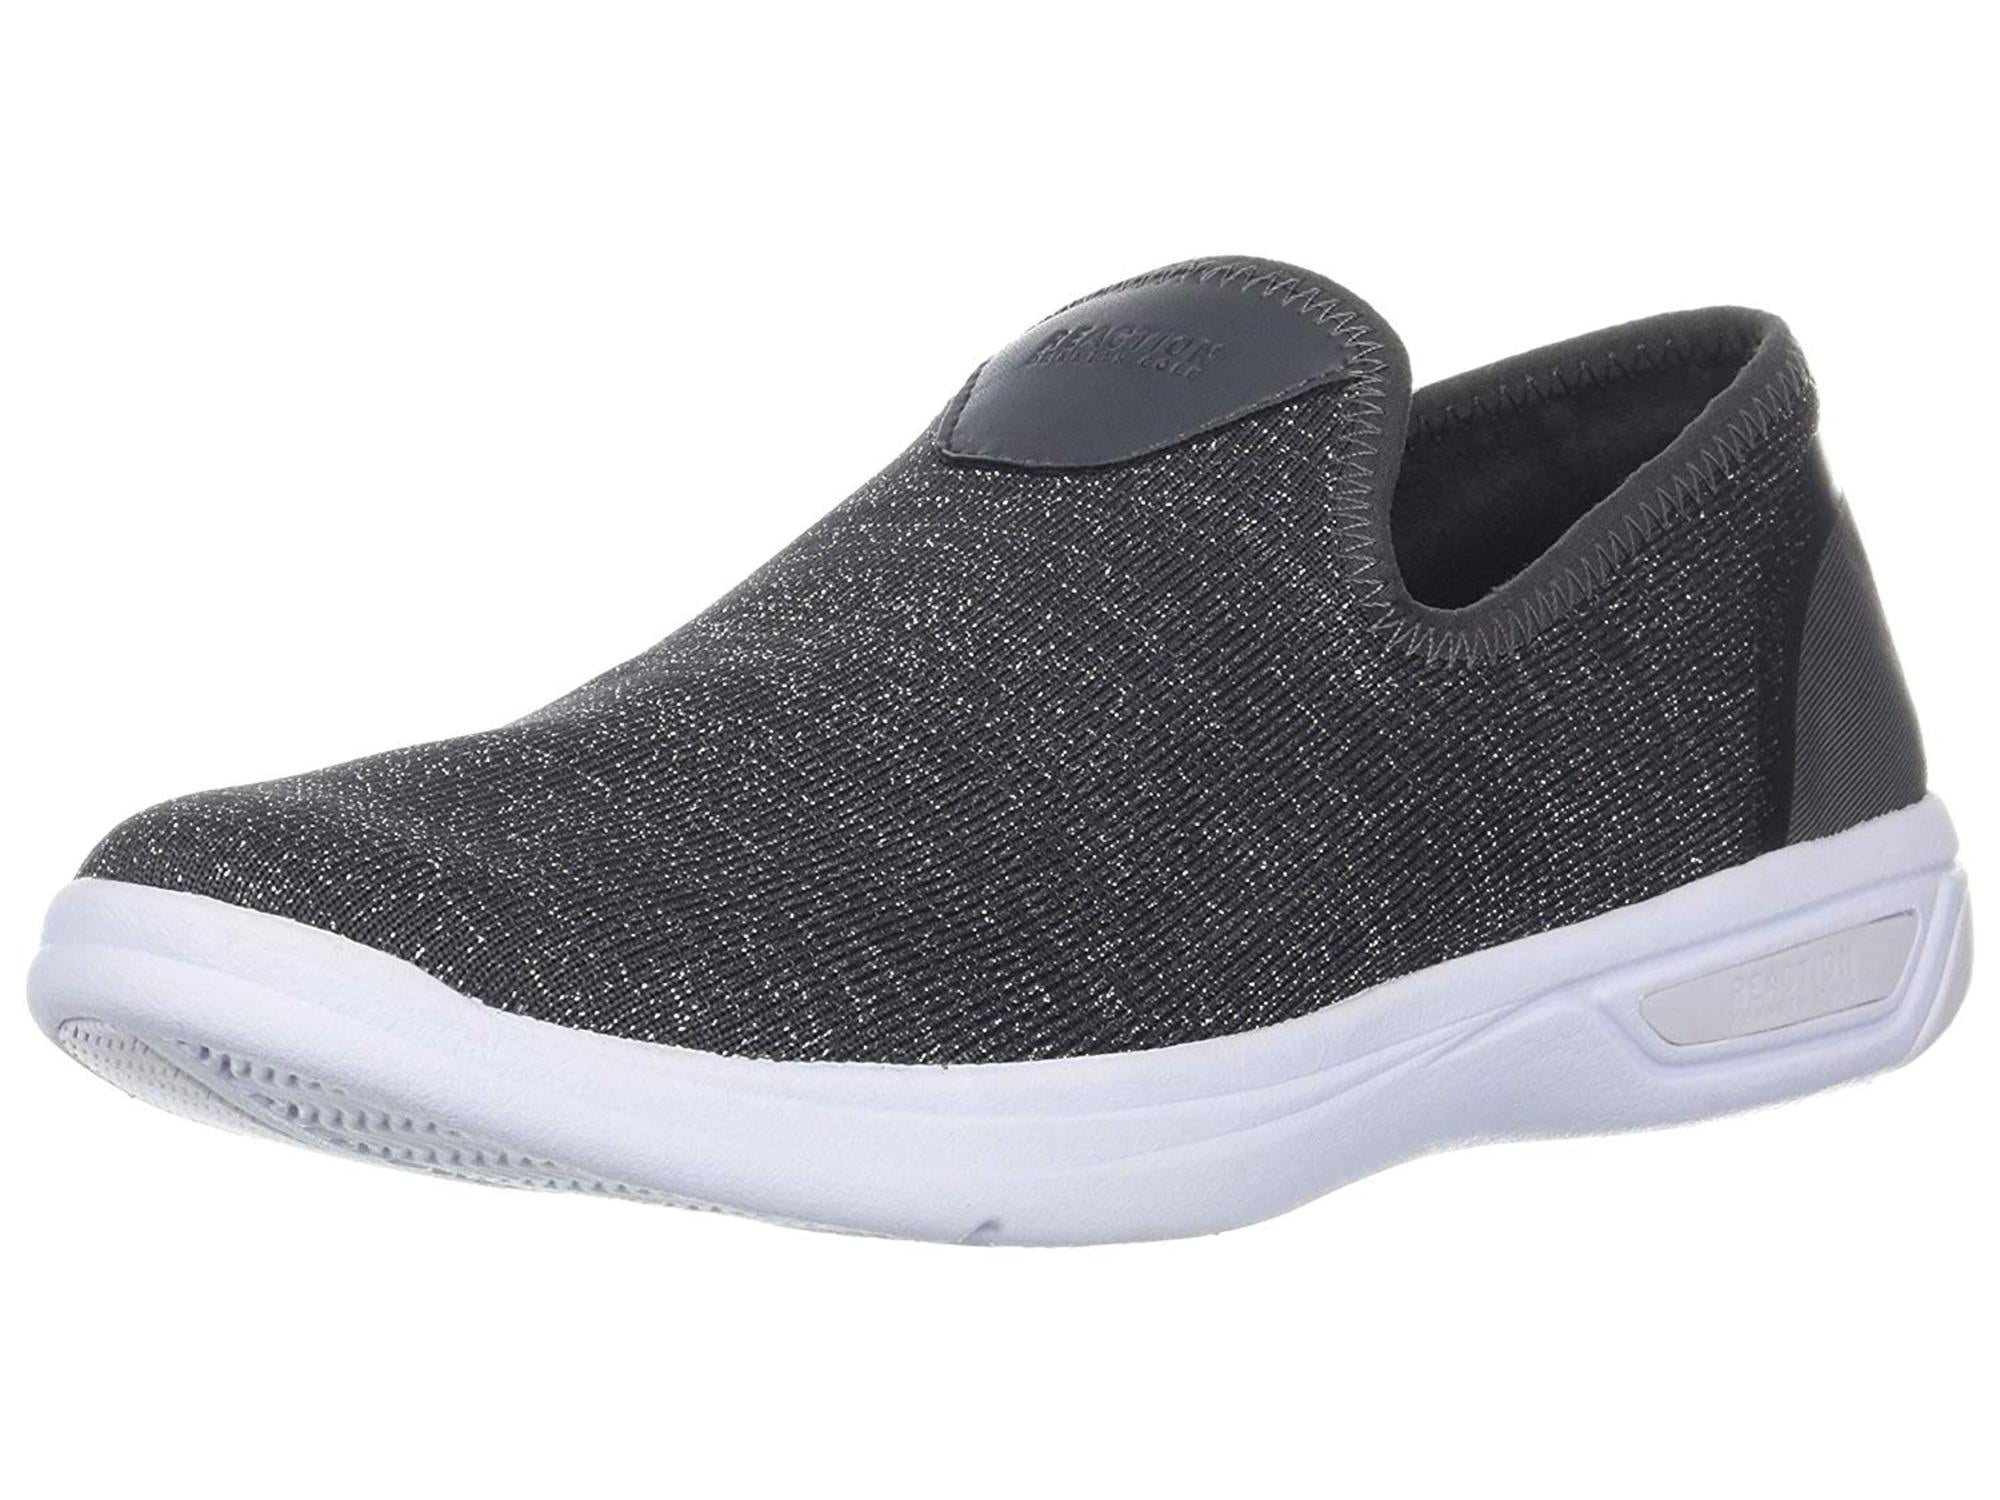 Kenneth Cole Reaction Womens The Ready Sneaker Fabric Low Top Slip On ...